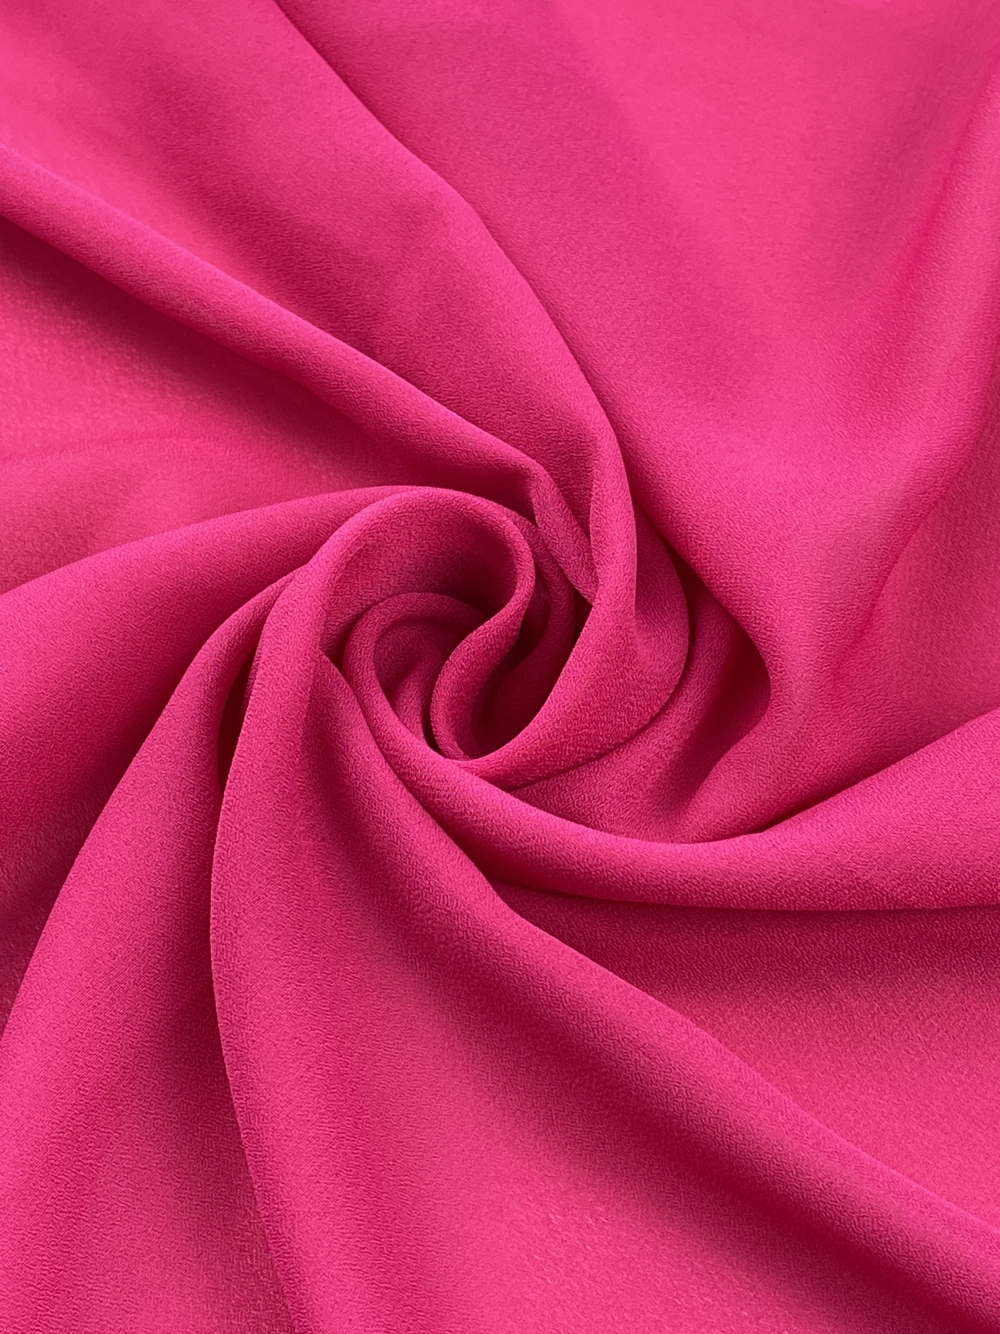 Stretch Crepe Fabric - Versatile Polyester Cloth by The Yard with 2-Way  Stretch - Ideal for Dresses, Gowns, Pants, Drapes, and Backdrops - 1 Yard